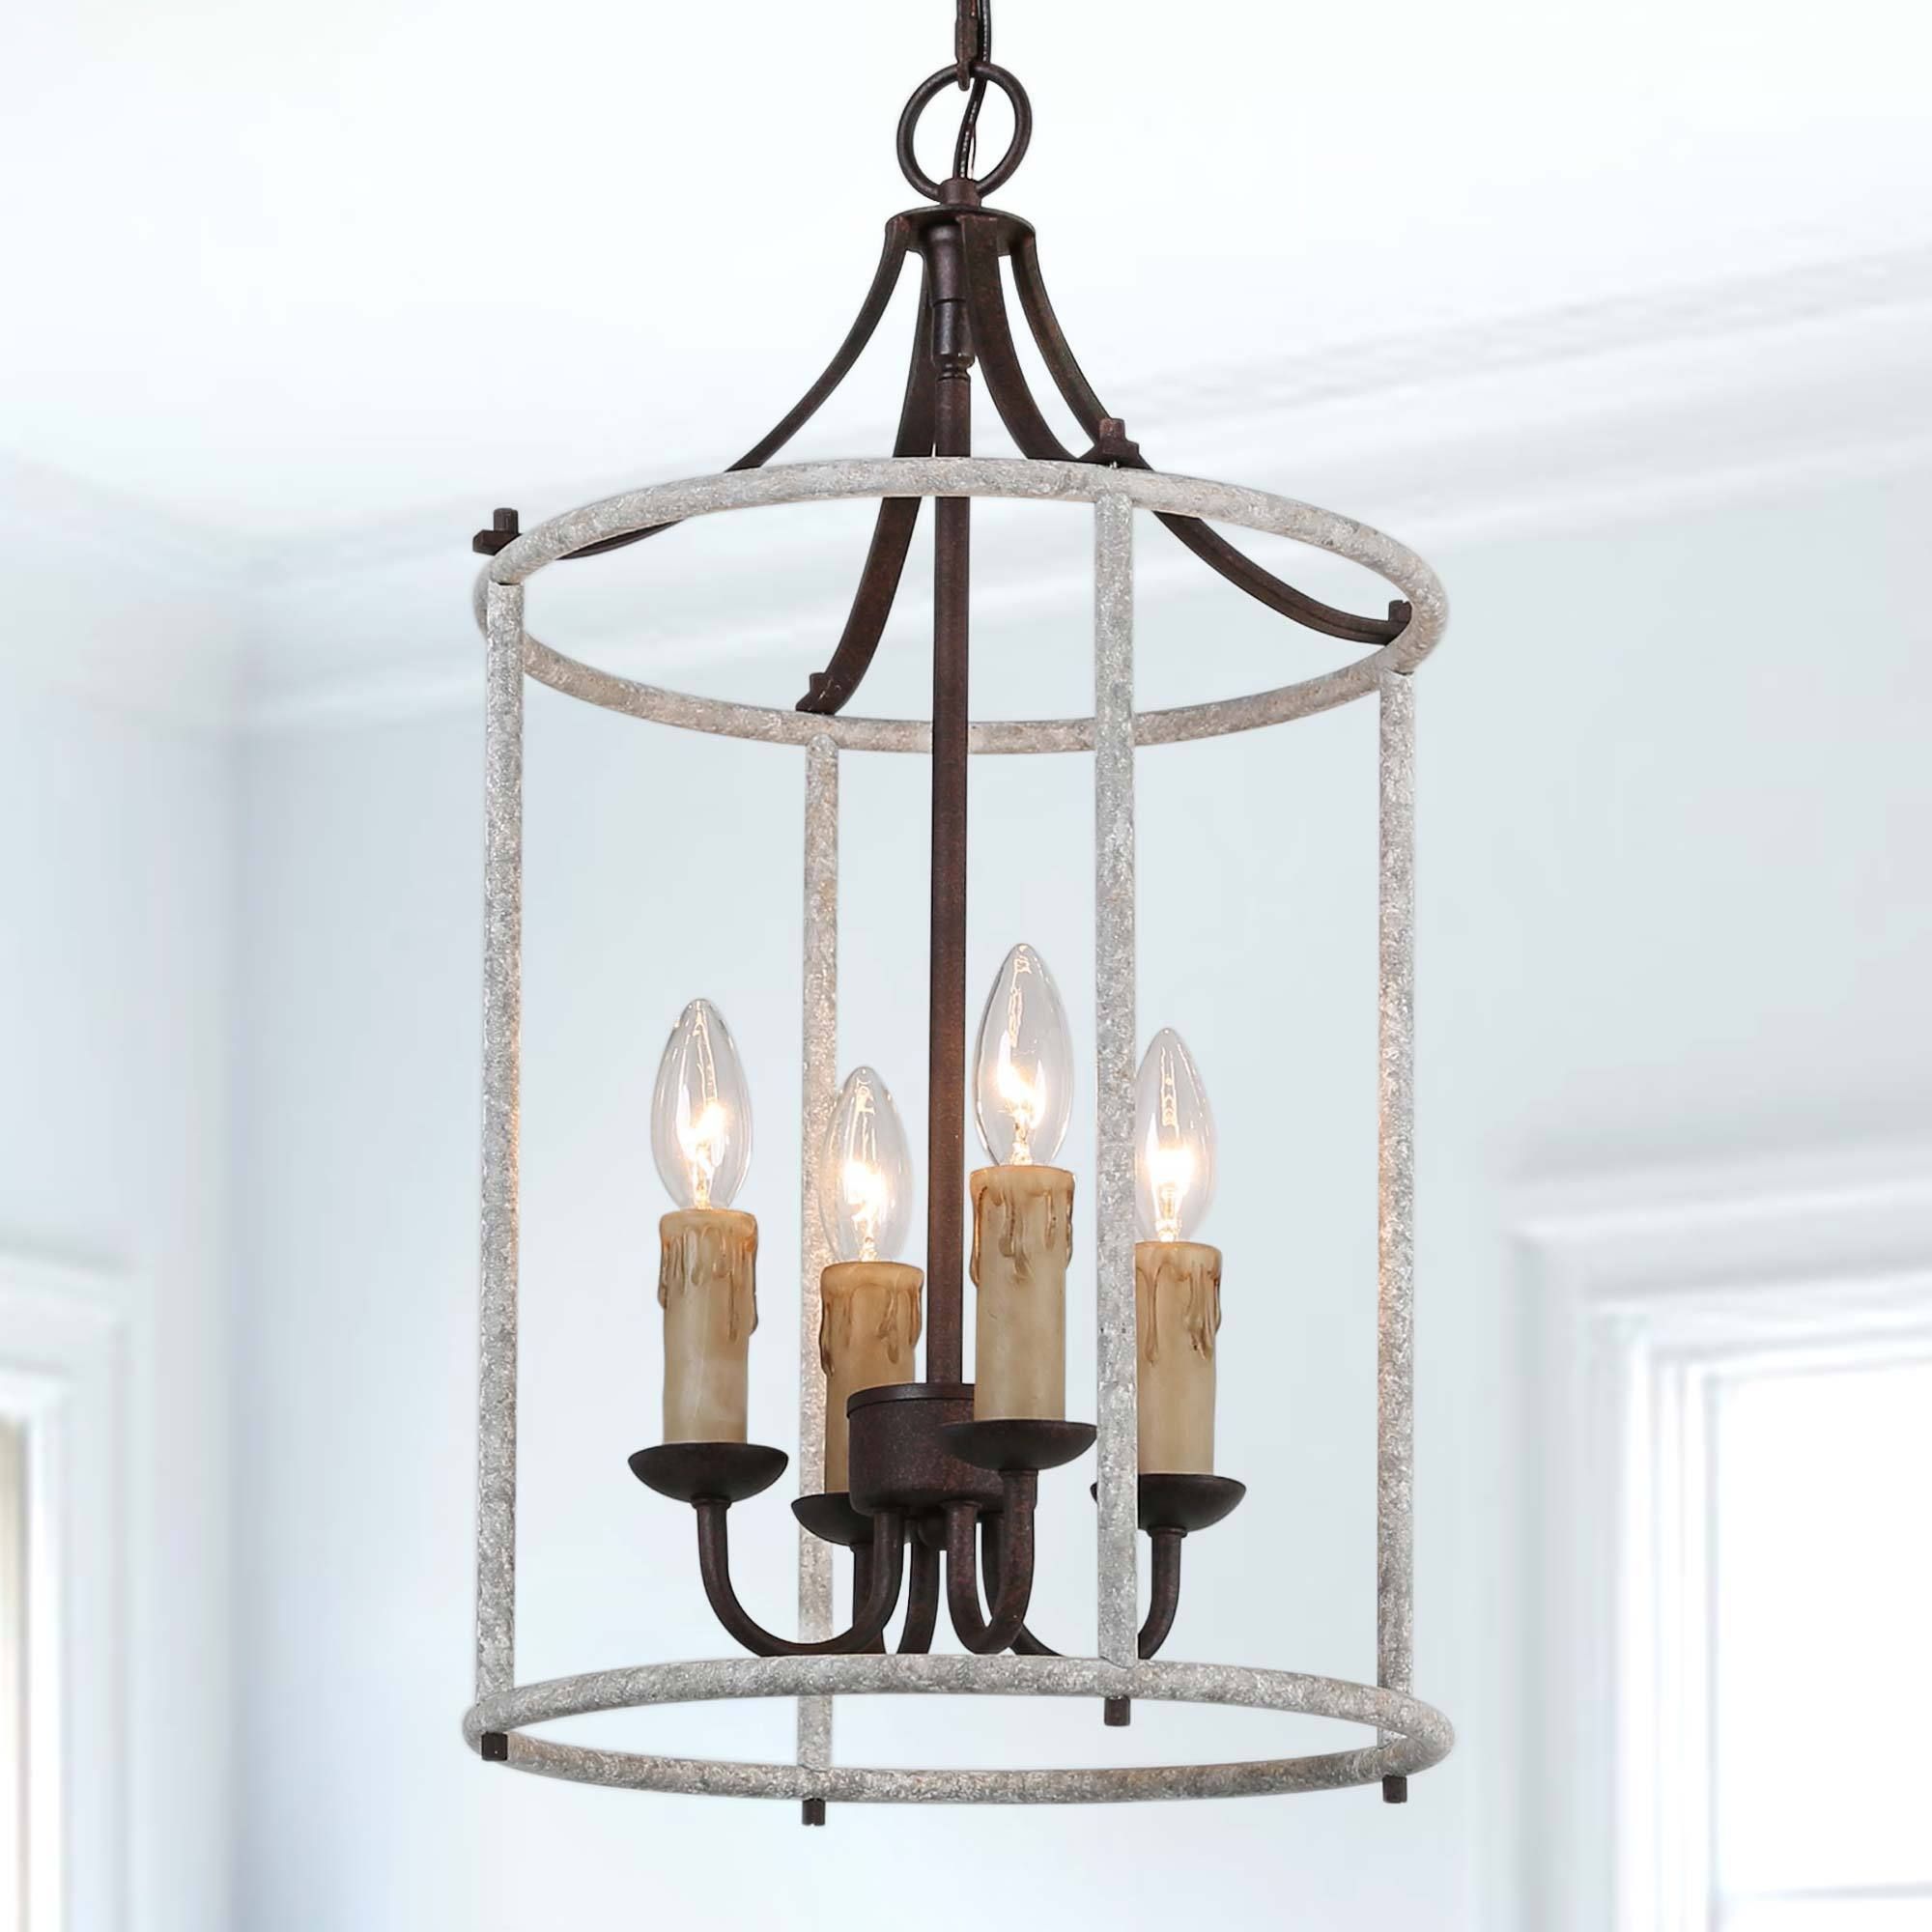 Gray Wash Lantern Chandeliers With Well Liked New World Decor Ribbon 4 Light Distressed Gray And Bronze Coastal Cage  Chandelier In The Chandeliers Department At Lowes (View 7 of 15)